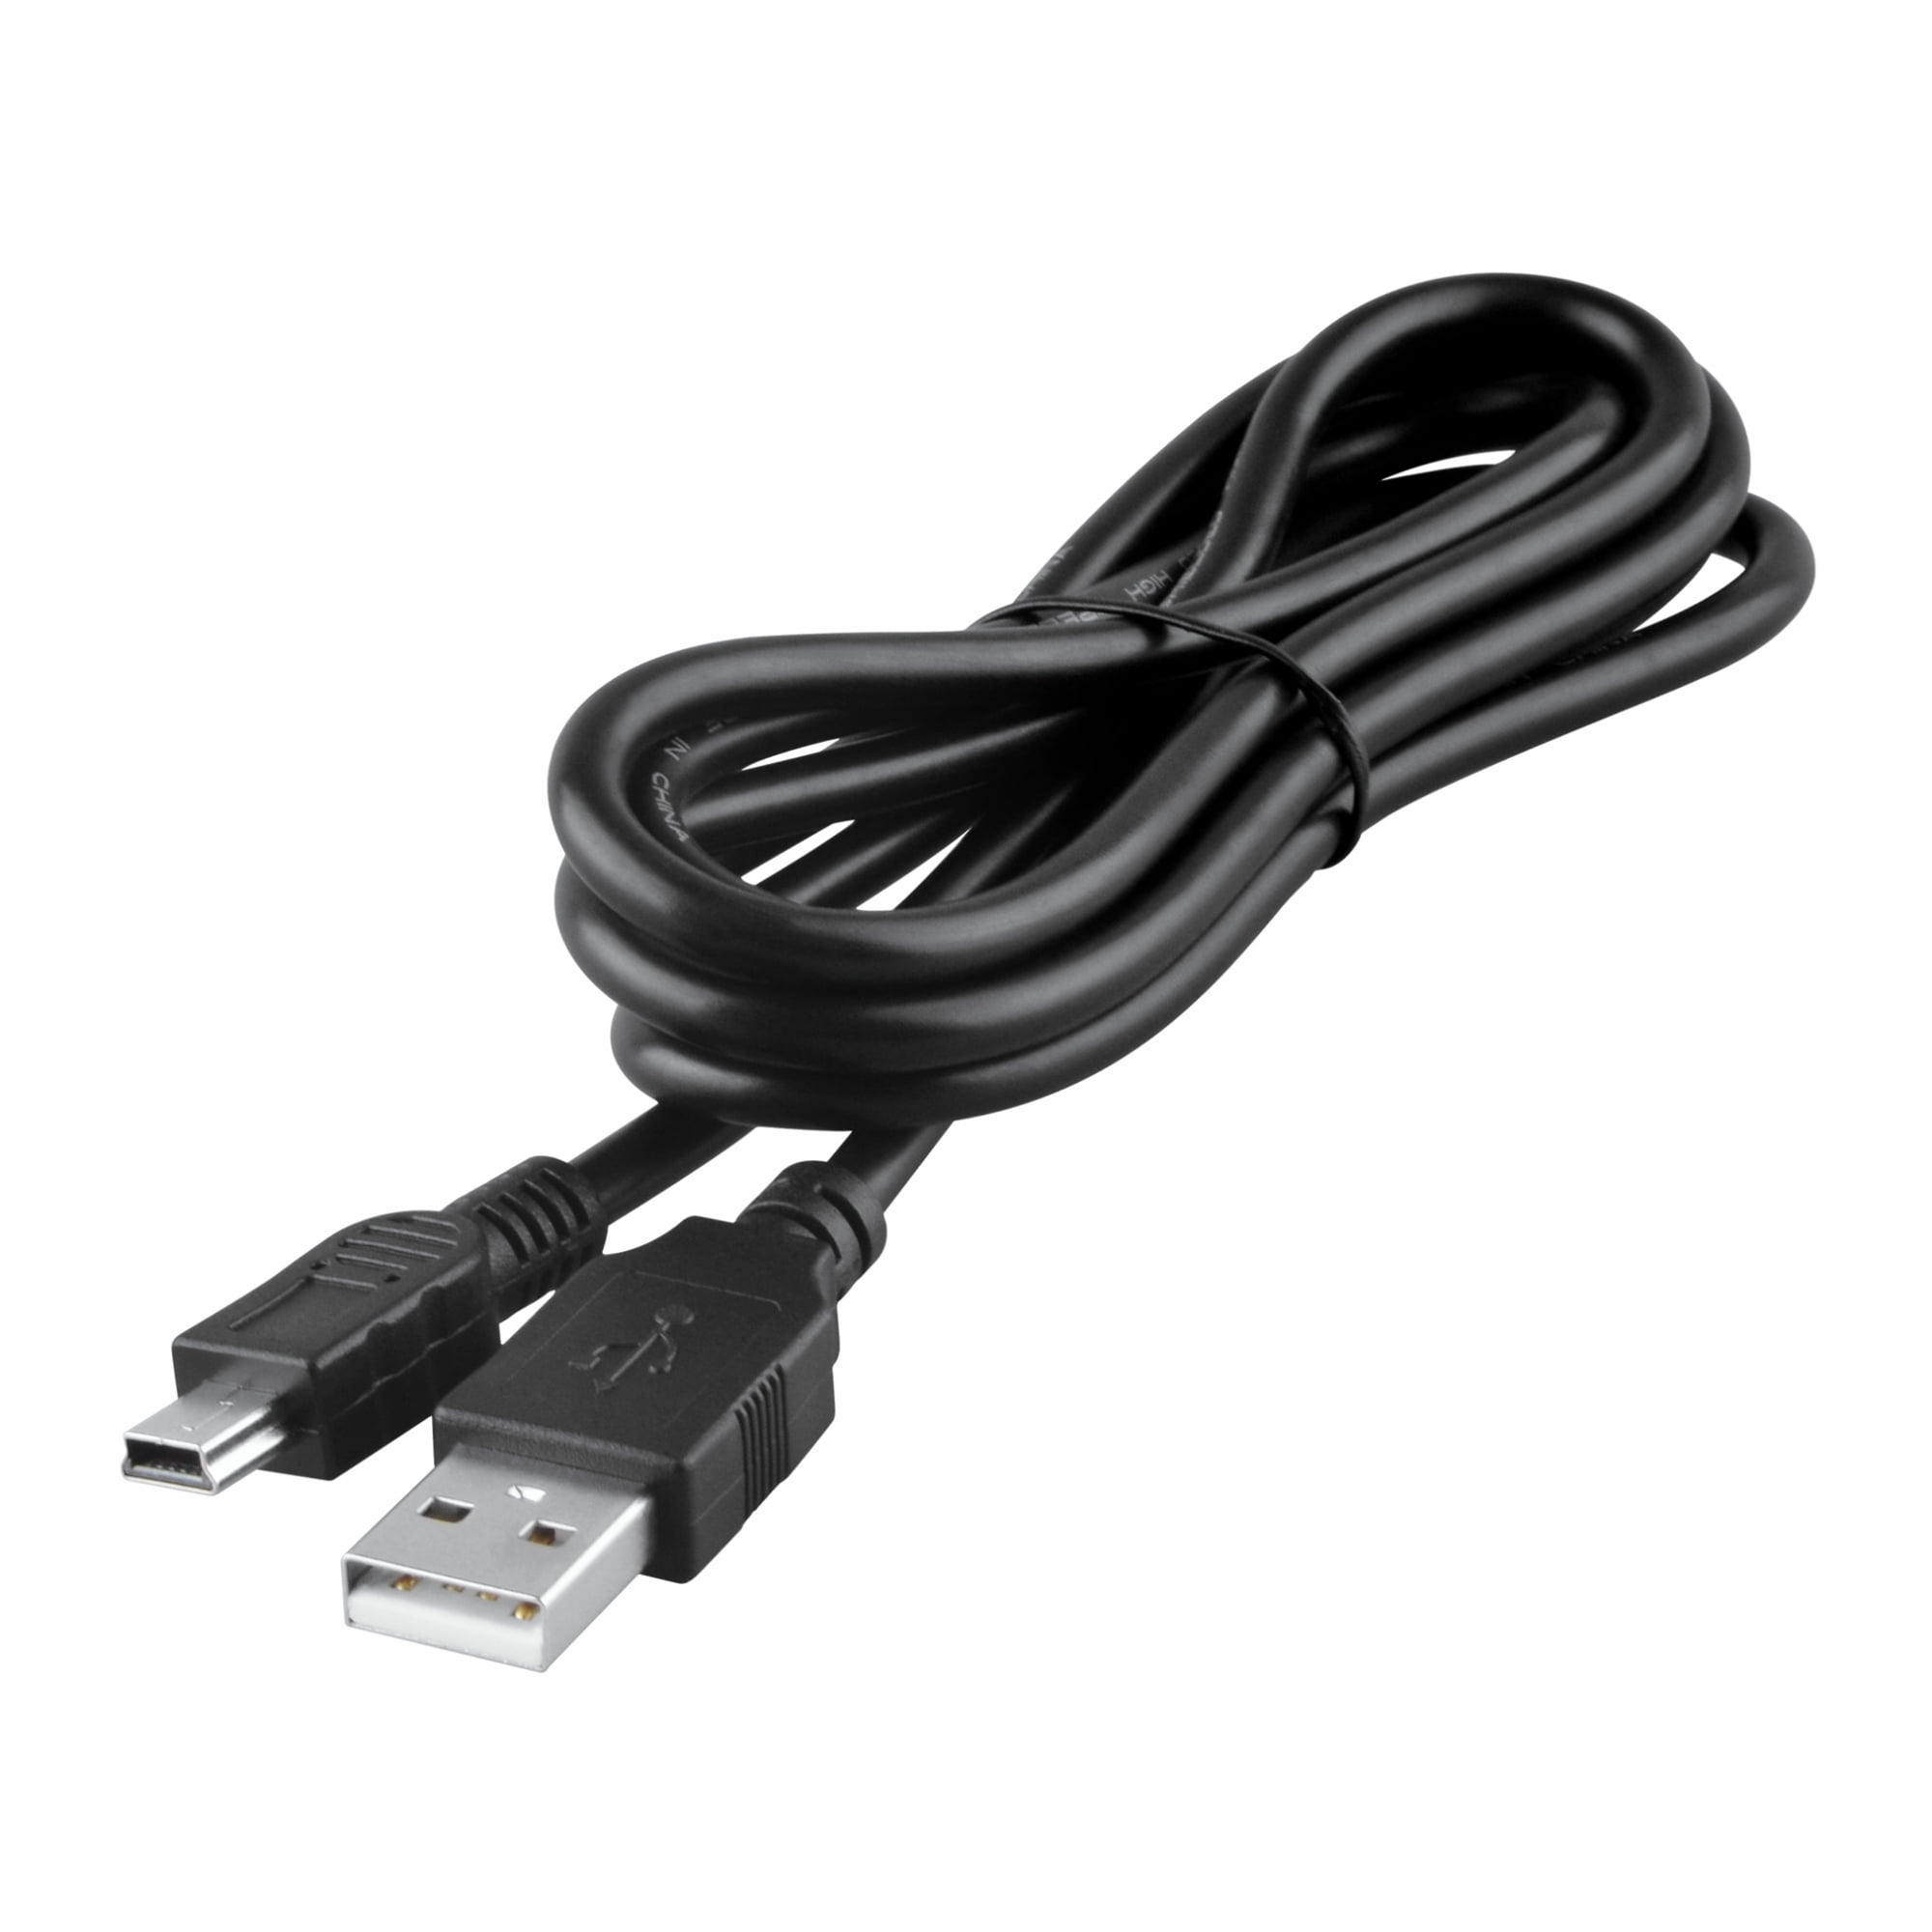 USB Charging Power Charger+Data Sync Cable Cord Lead For Kobo eReader N647-KUS-B 